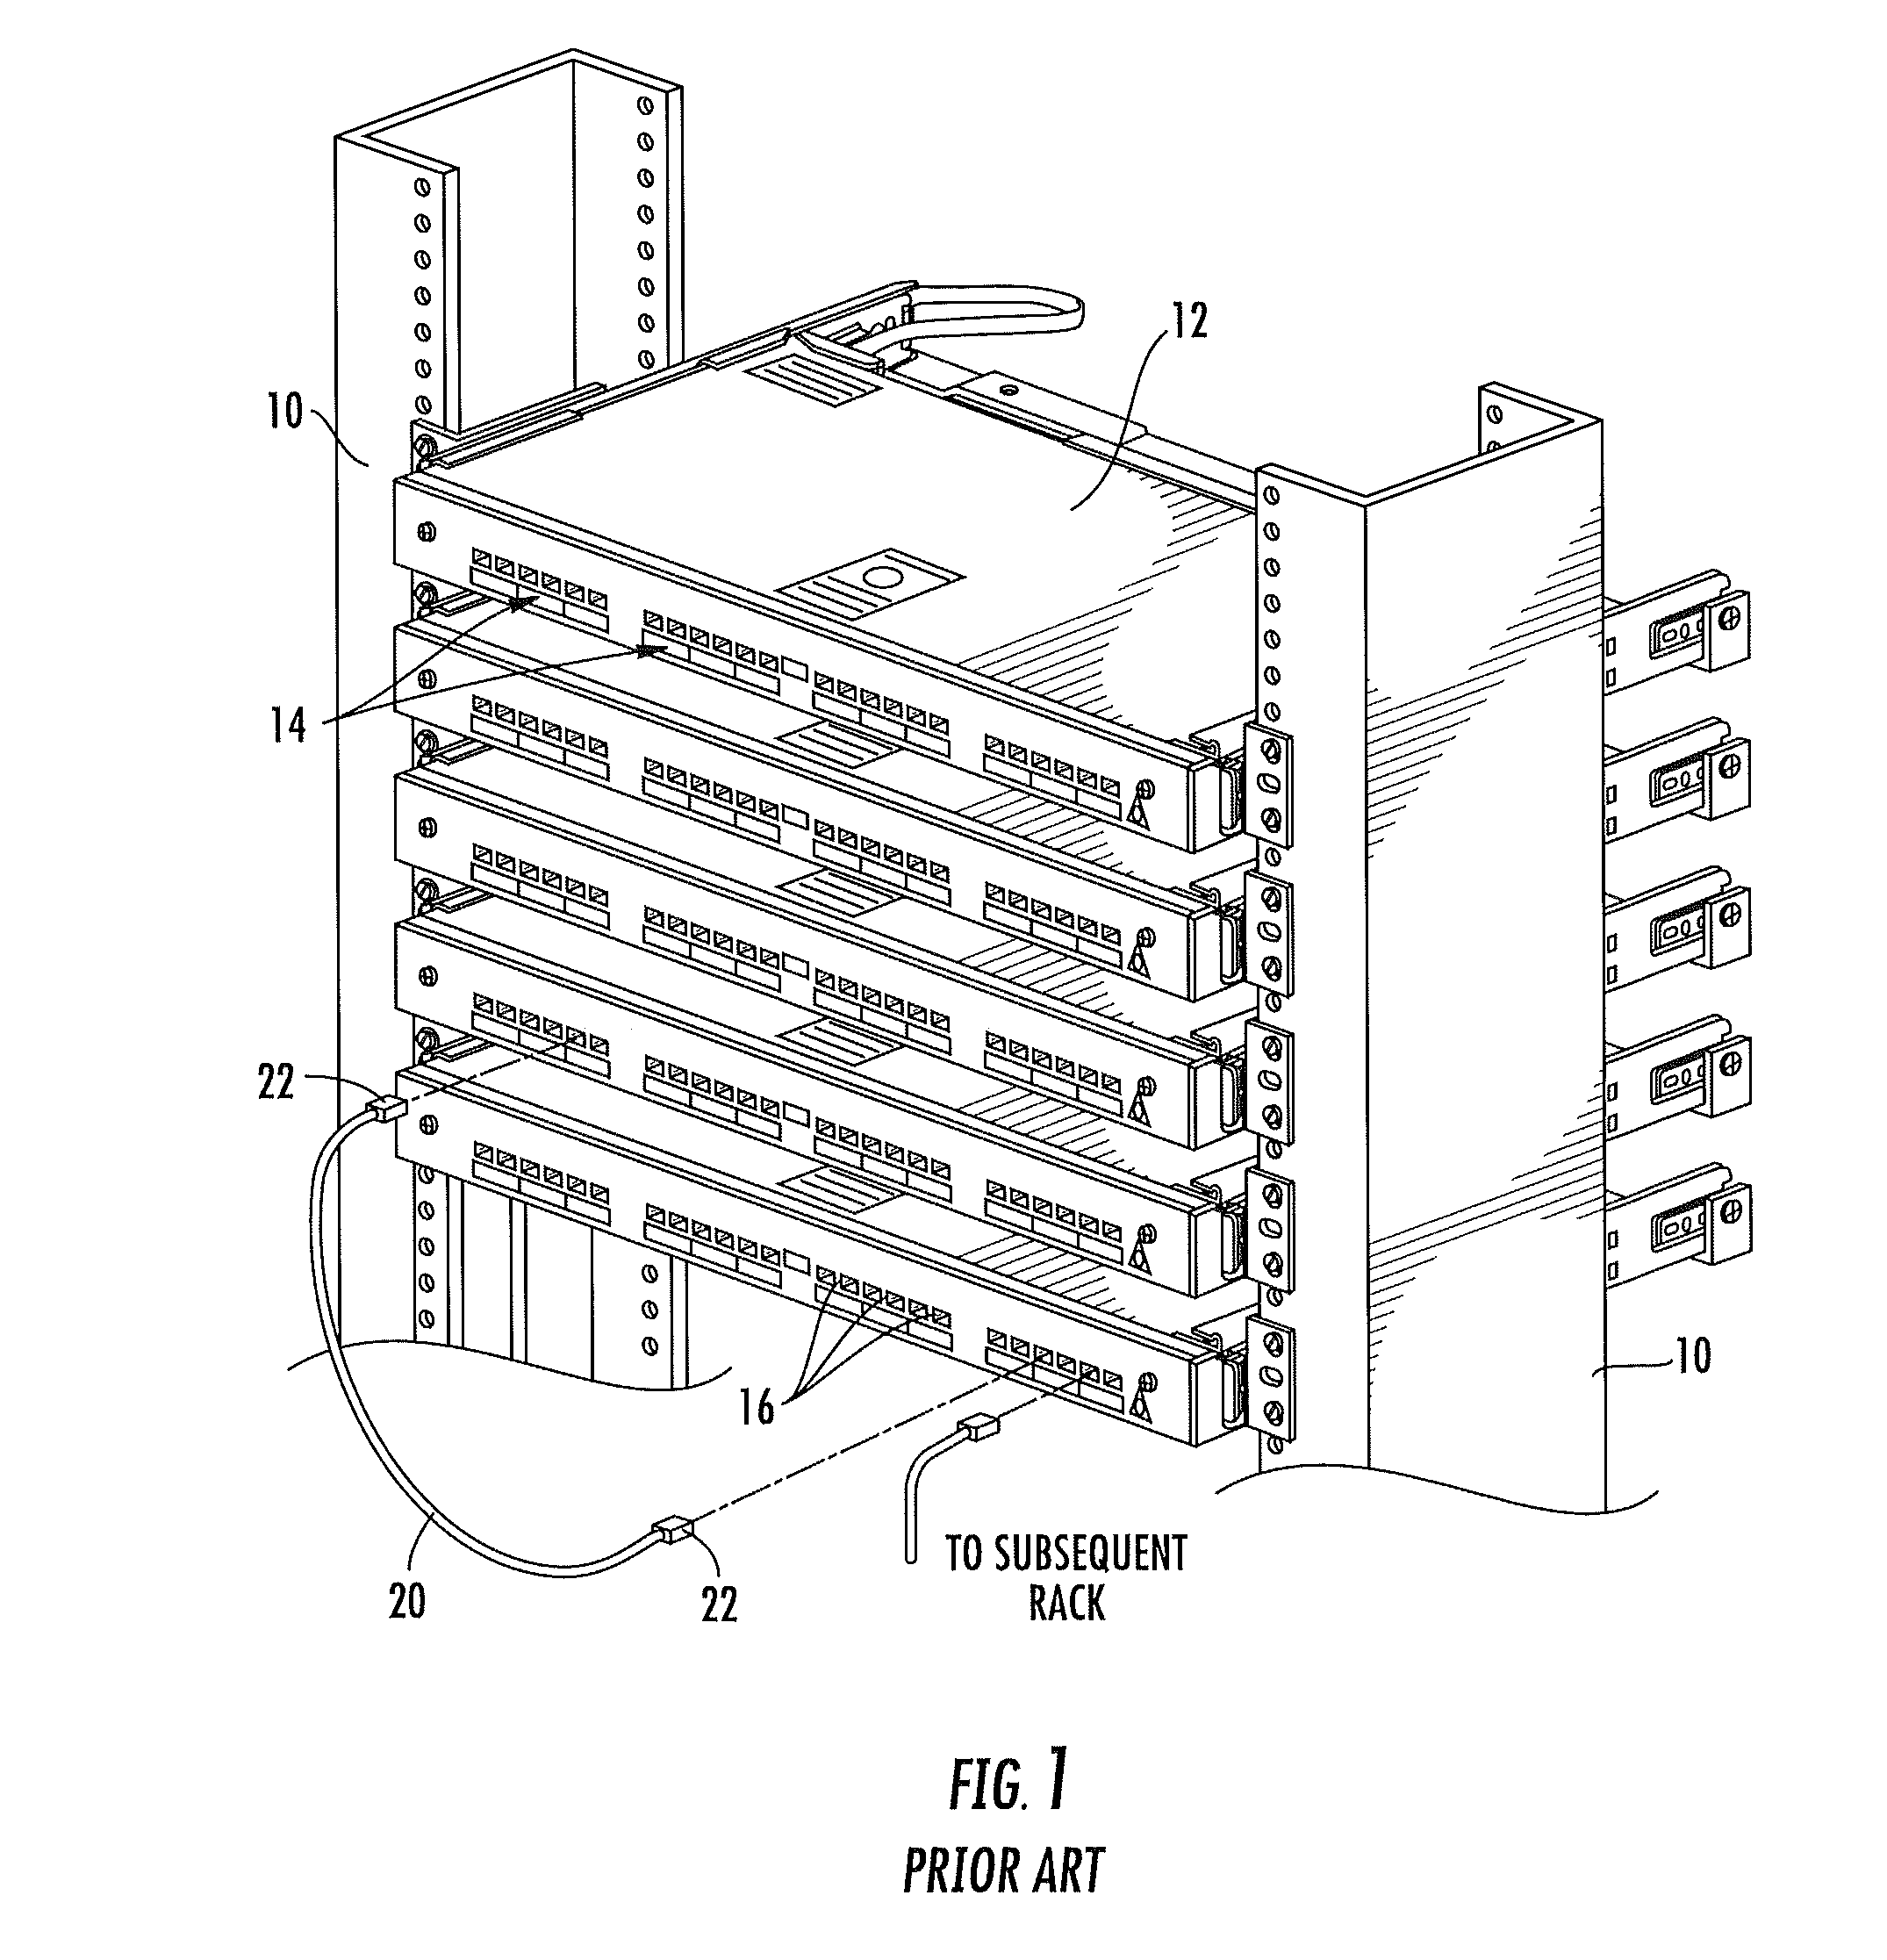 Dynamic labeling of patch panel ports